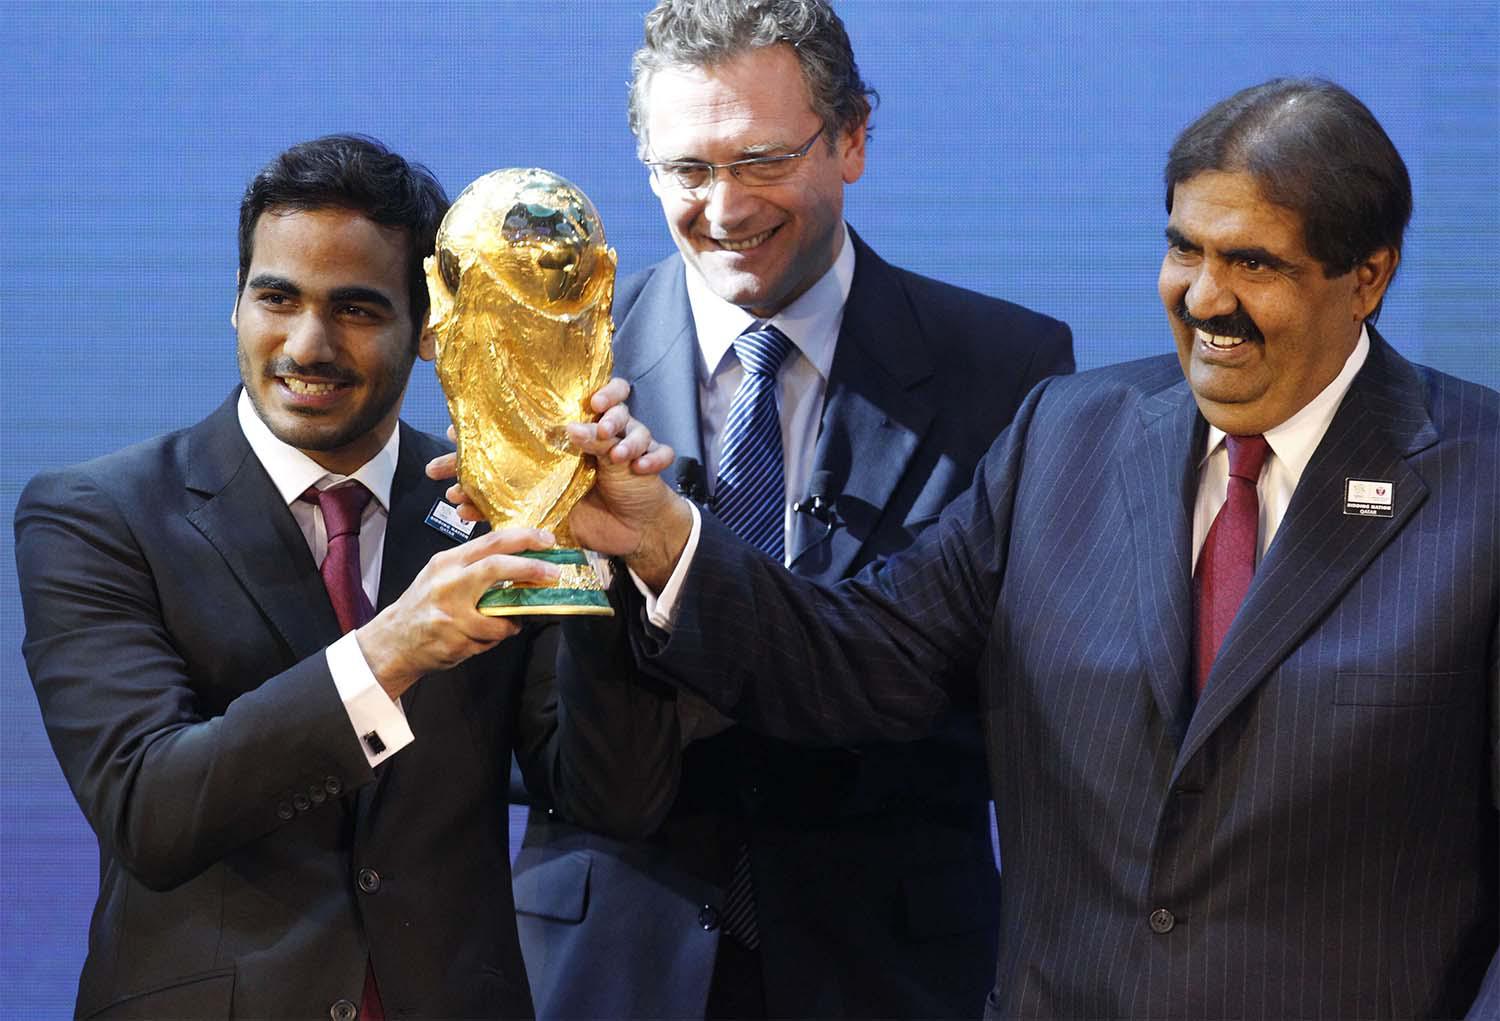 Qatar has a long history of providing favours and family benefits to key influencers within FIFA and European soccer